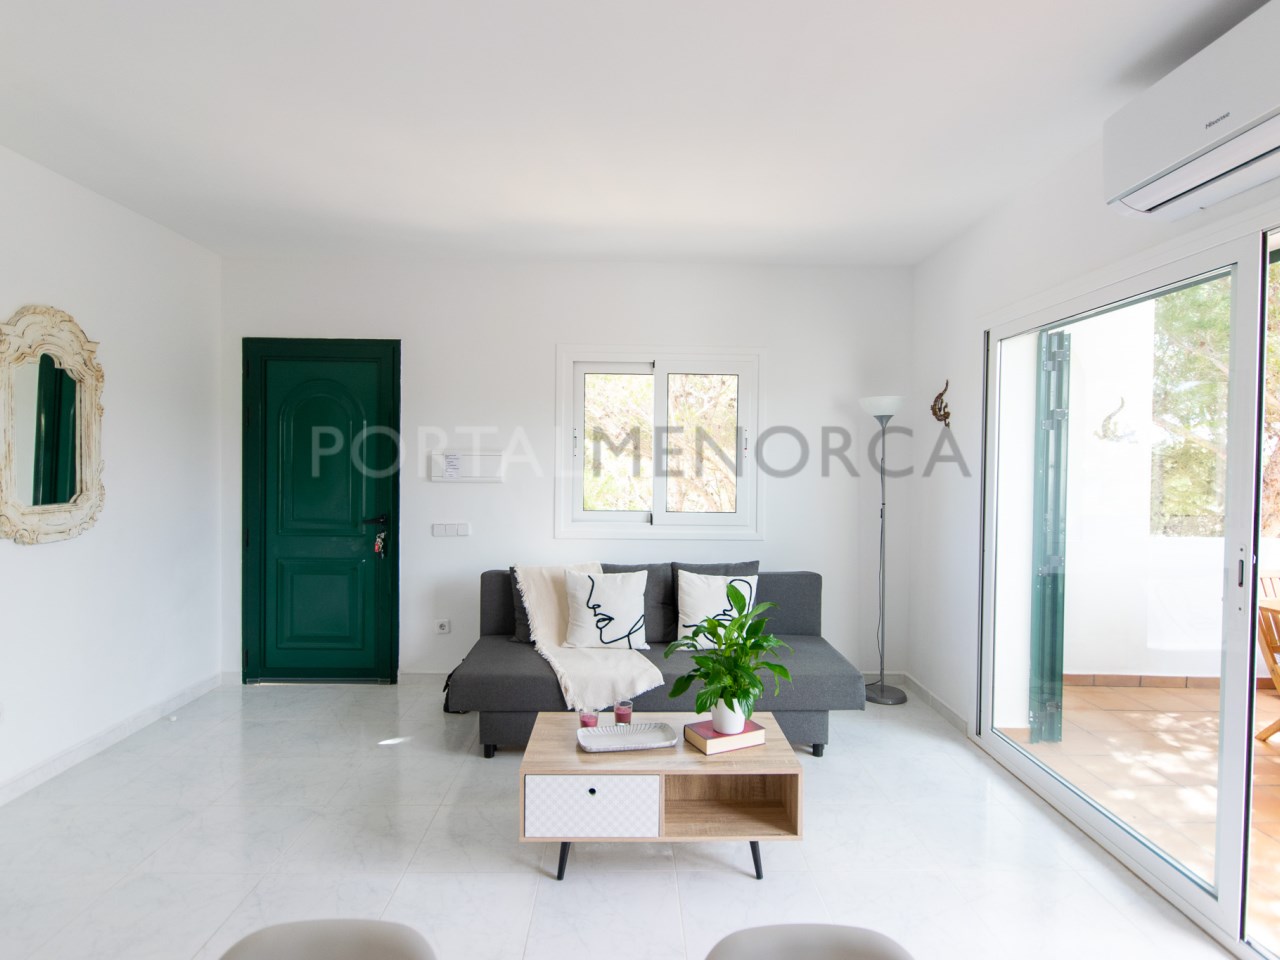 Living-dining room of a beautiful renovated flat in Son Parc